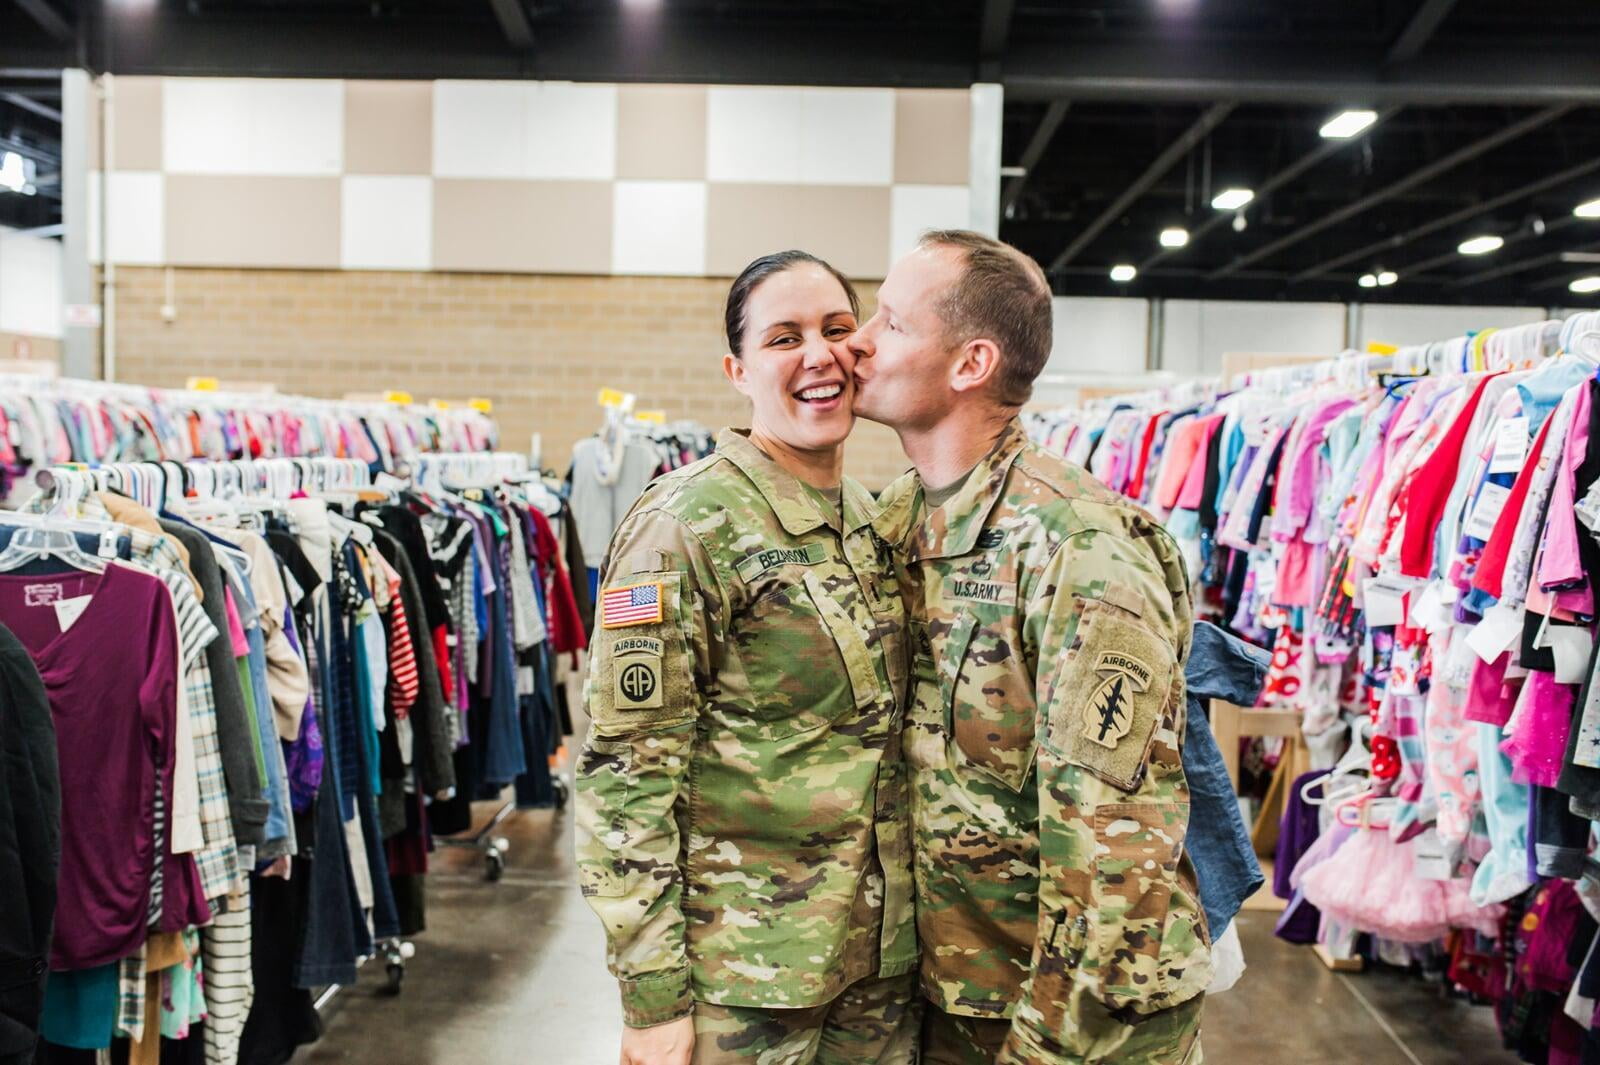 A military husband in camo kisses his military wife, also in camo, at the JBF sale in Tacoma Washington.